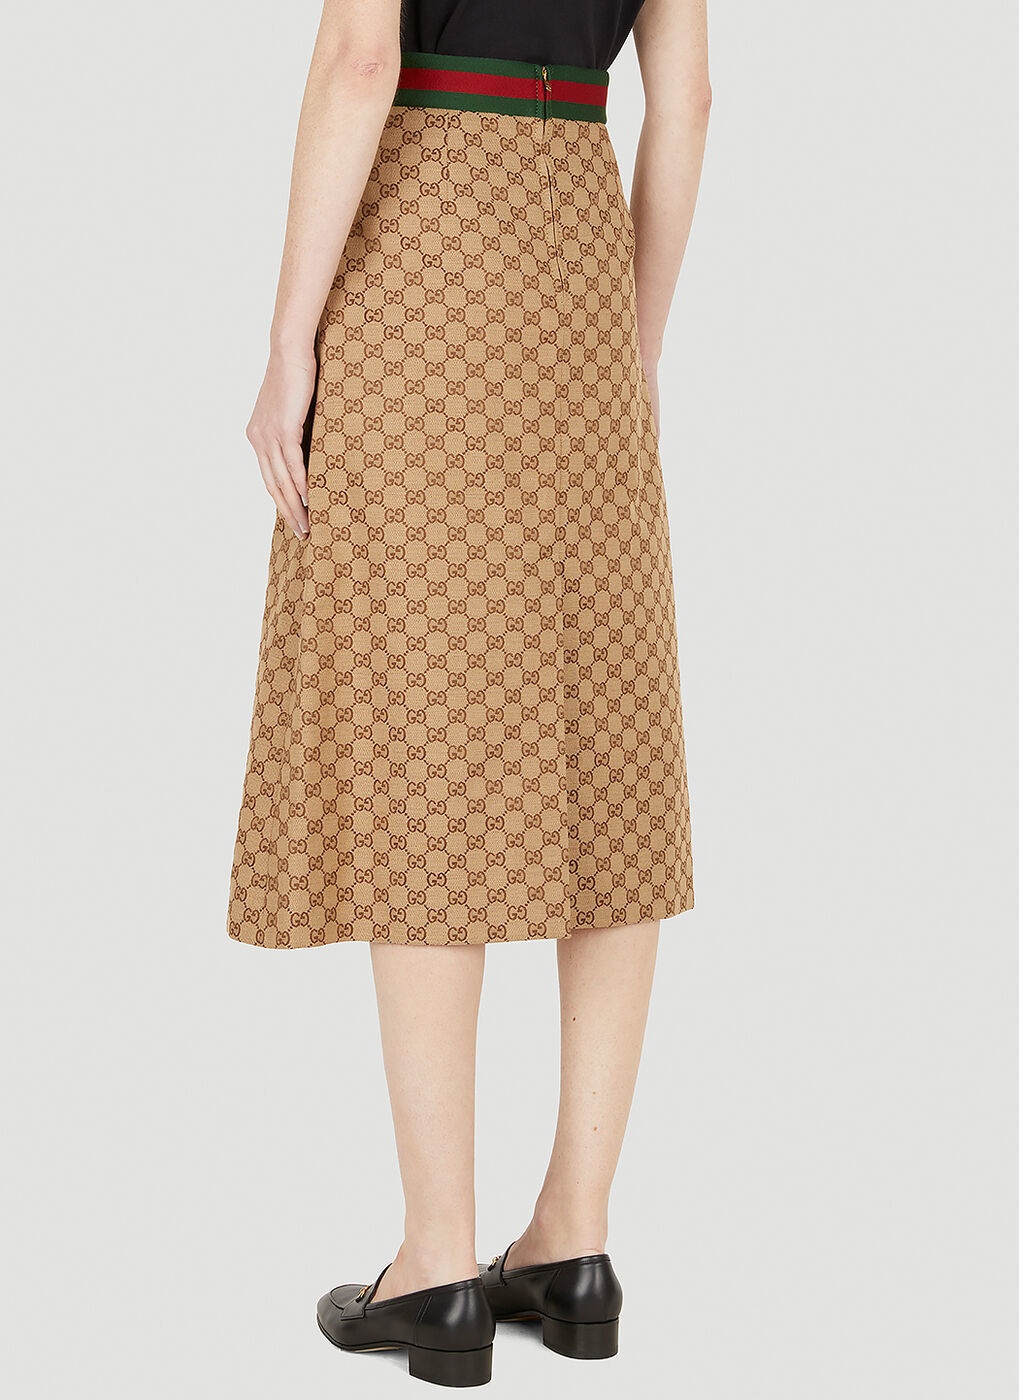 Gucci Skirt In gg Original Canvas in Natural  Lyst